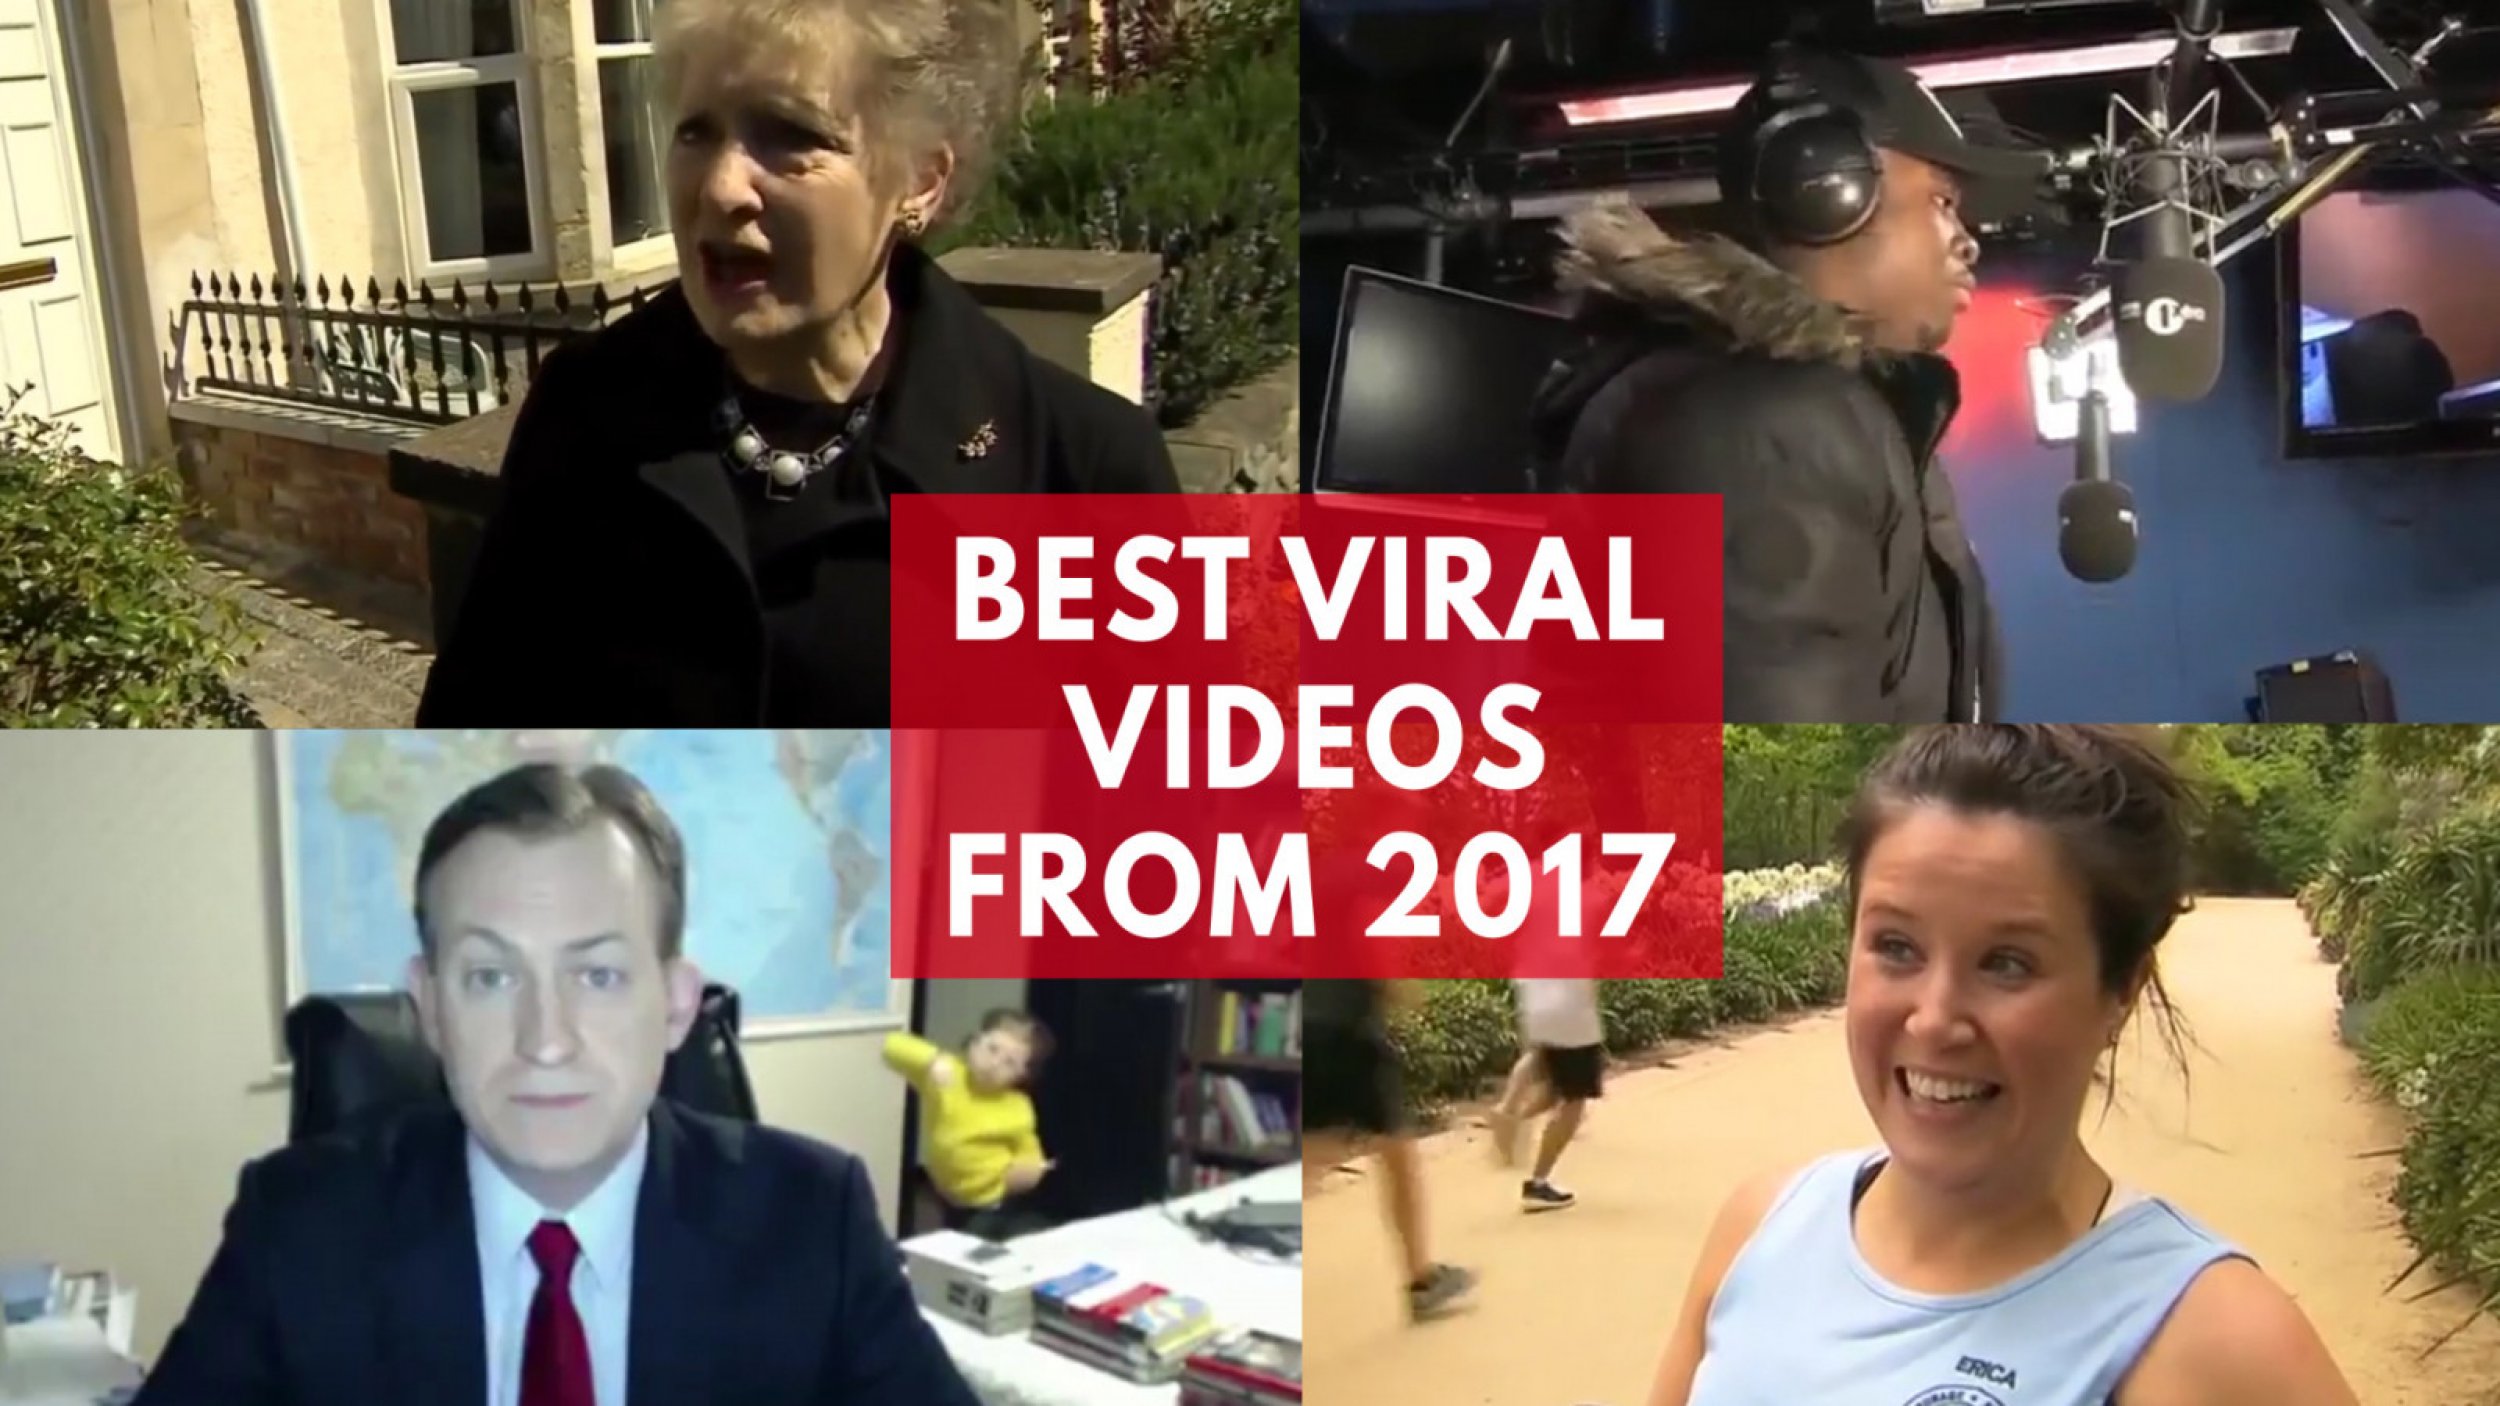 The Best Viral Videos Of 2017